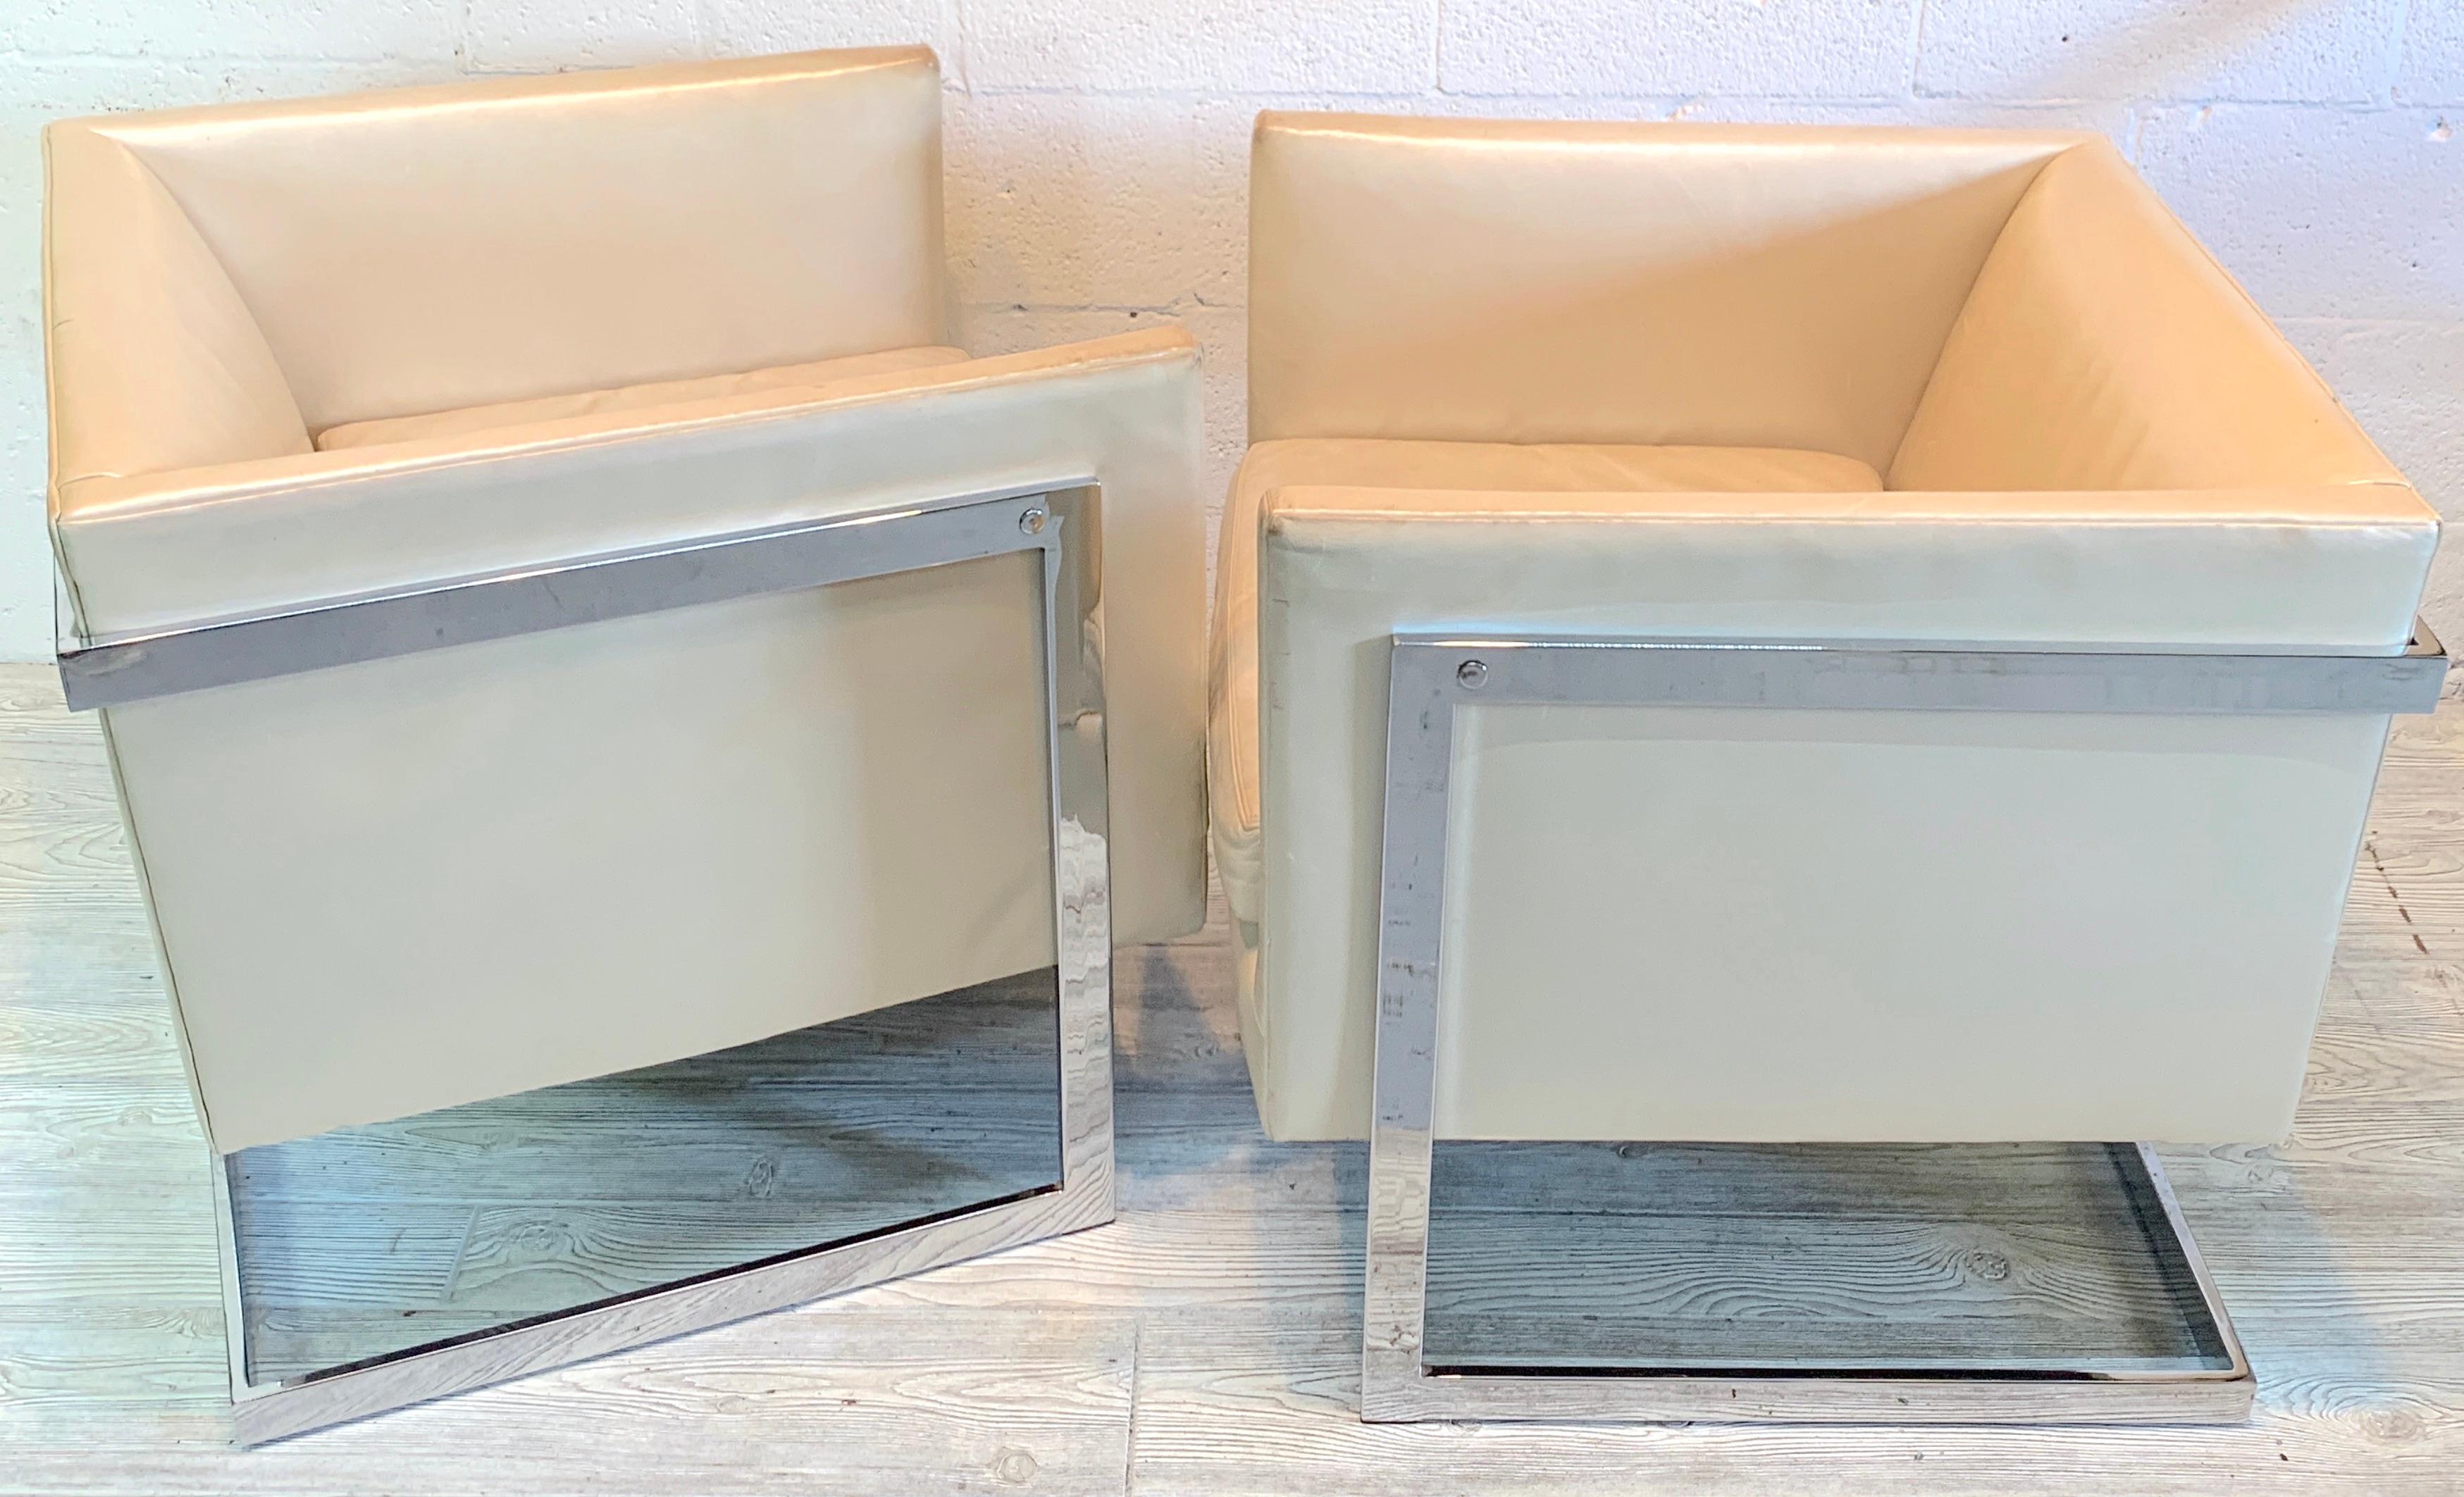 A pair of Milo Baughman floating cube chair frames, circa 1980
Great form with 'T' backs, each one upholstered in leather, the frames are bright and shiny.
The leather is worn, these are ready for reupholstery. Great size and scale.